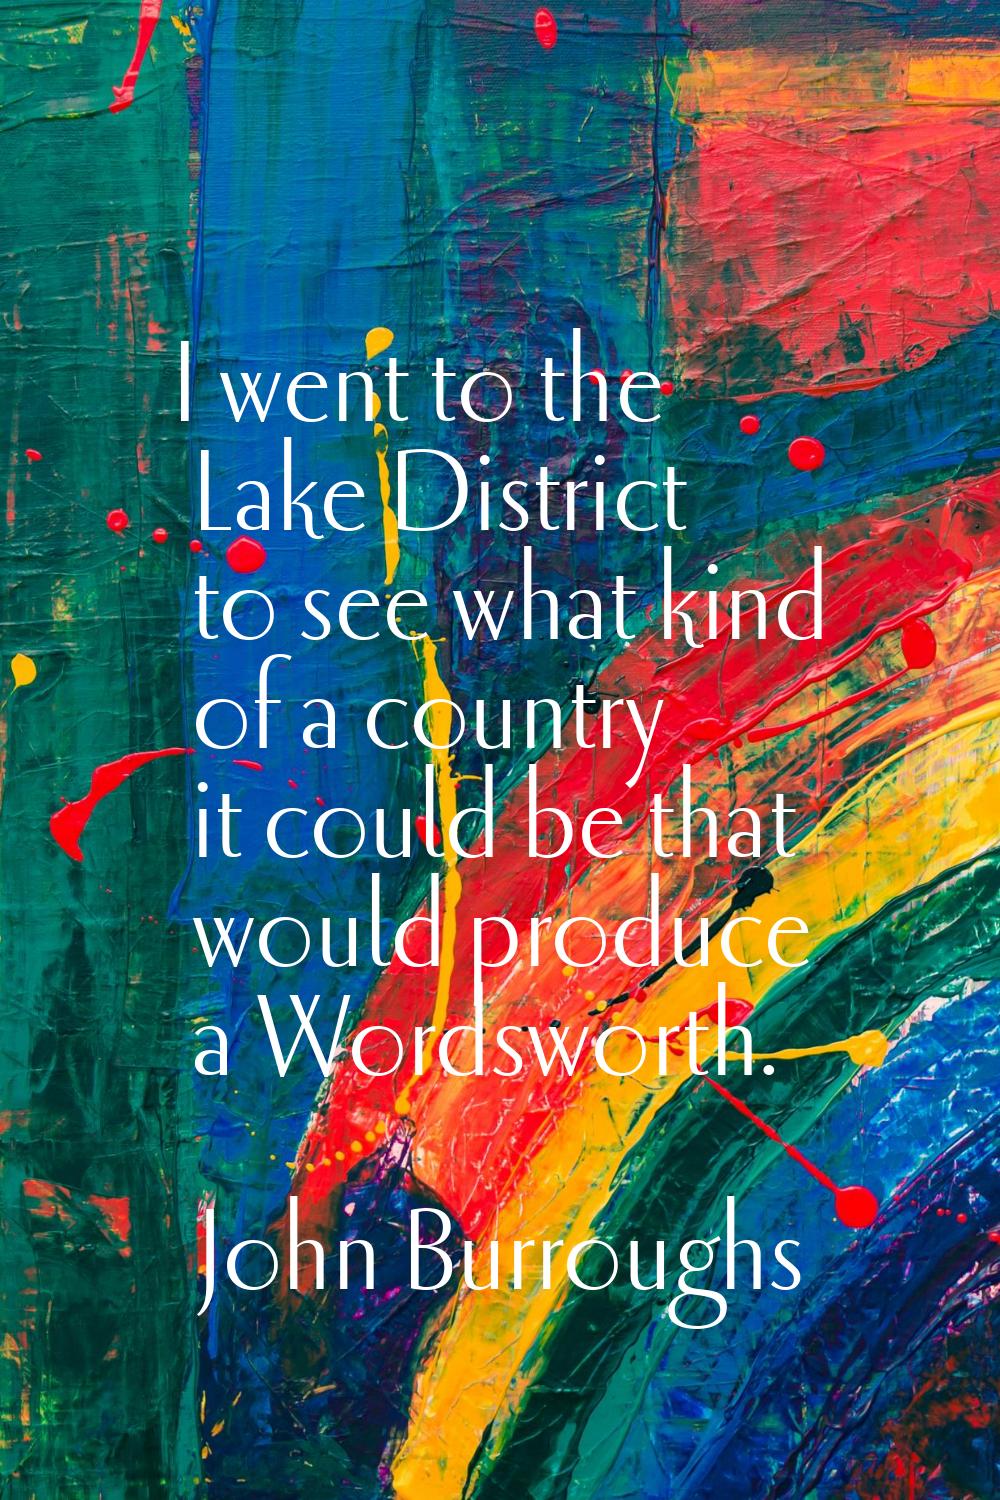 I went to the Lake District to see what kind of a country it could be that would produce a Wordswor